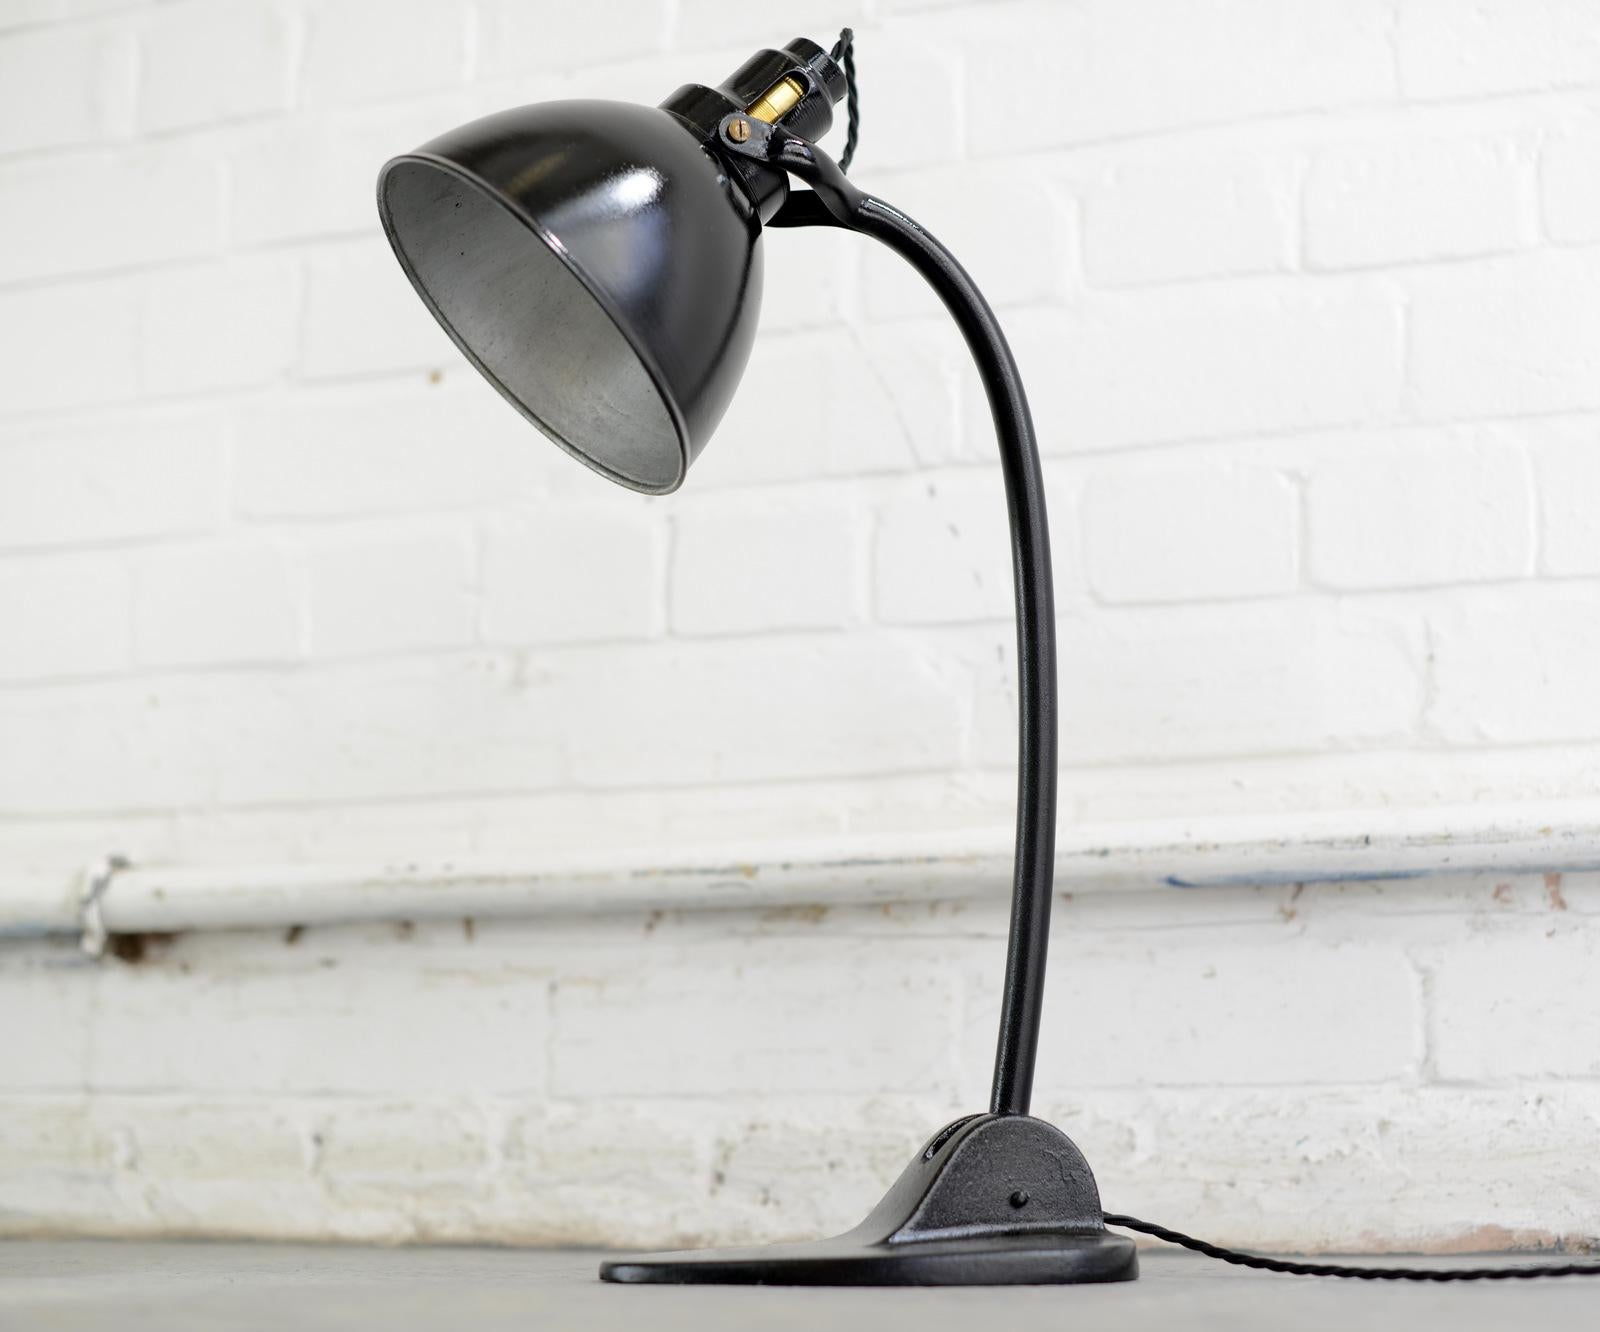 First generation Kandem 571 table lamp, circa 1920s

- Cast iron base
- Steel arm and shade
- Takes E27 fitting bulbs
- Stamped K&M on the base
- Made by Körting & Mathiesen, Leipzig
- German ~ Early 1920s
- 52cm tall x 17cm wide x 21cm